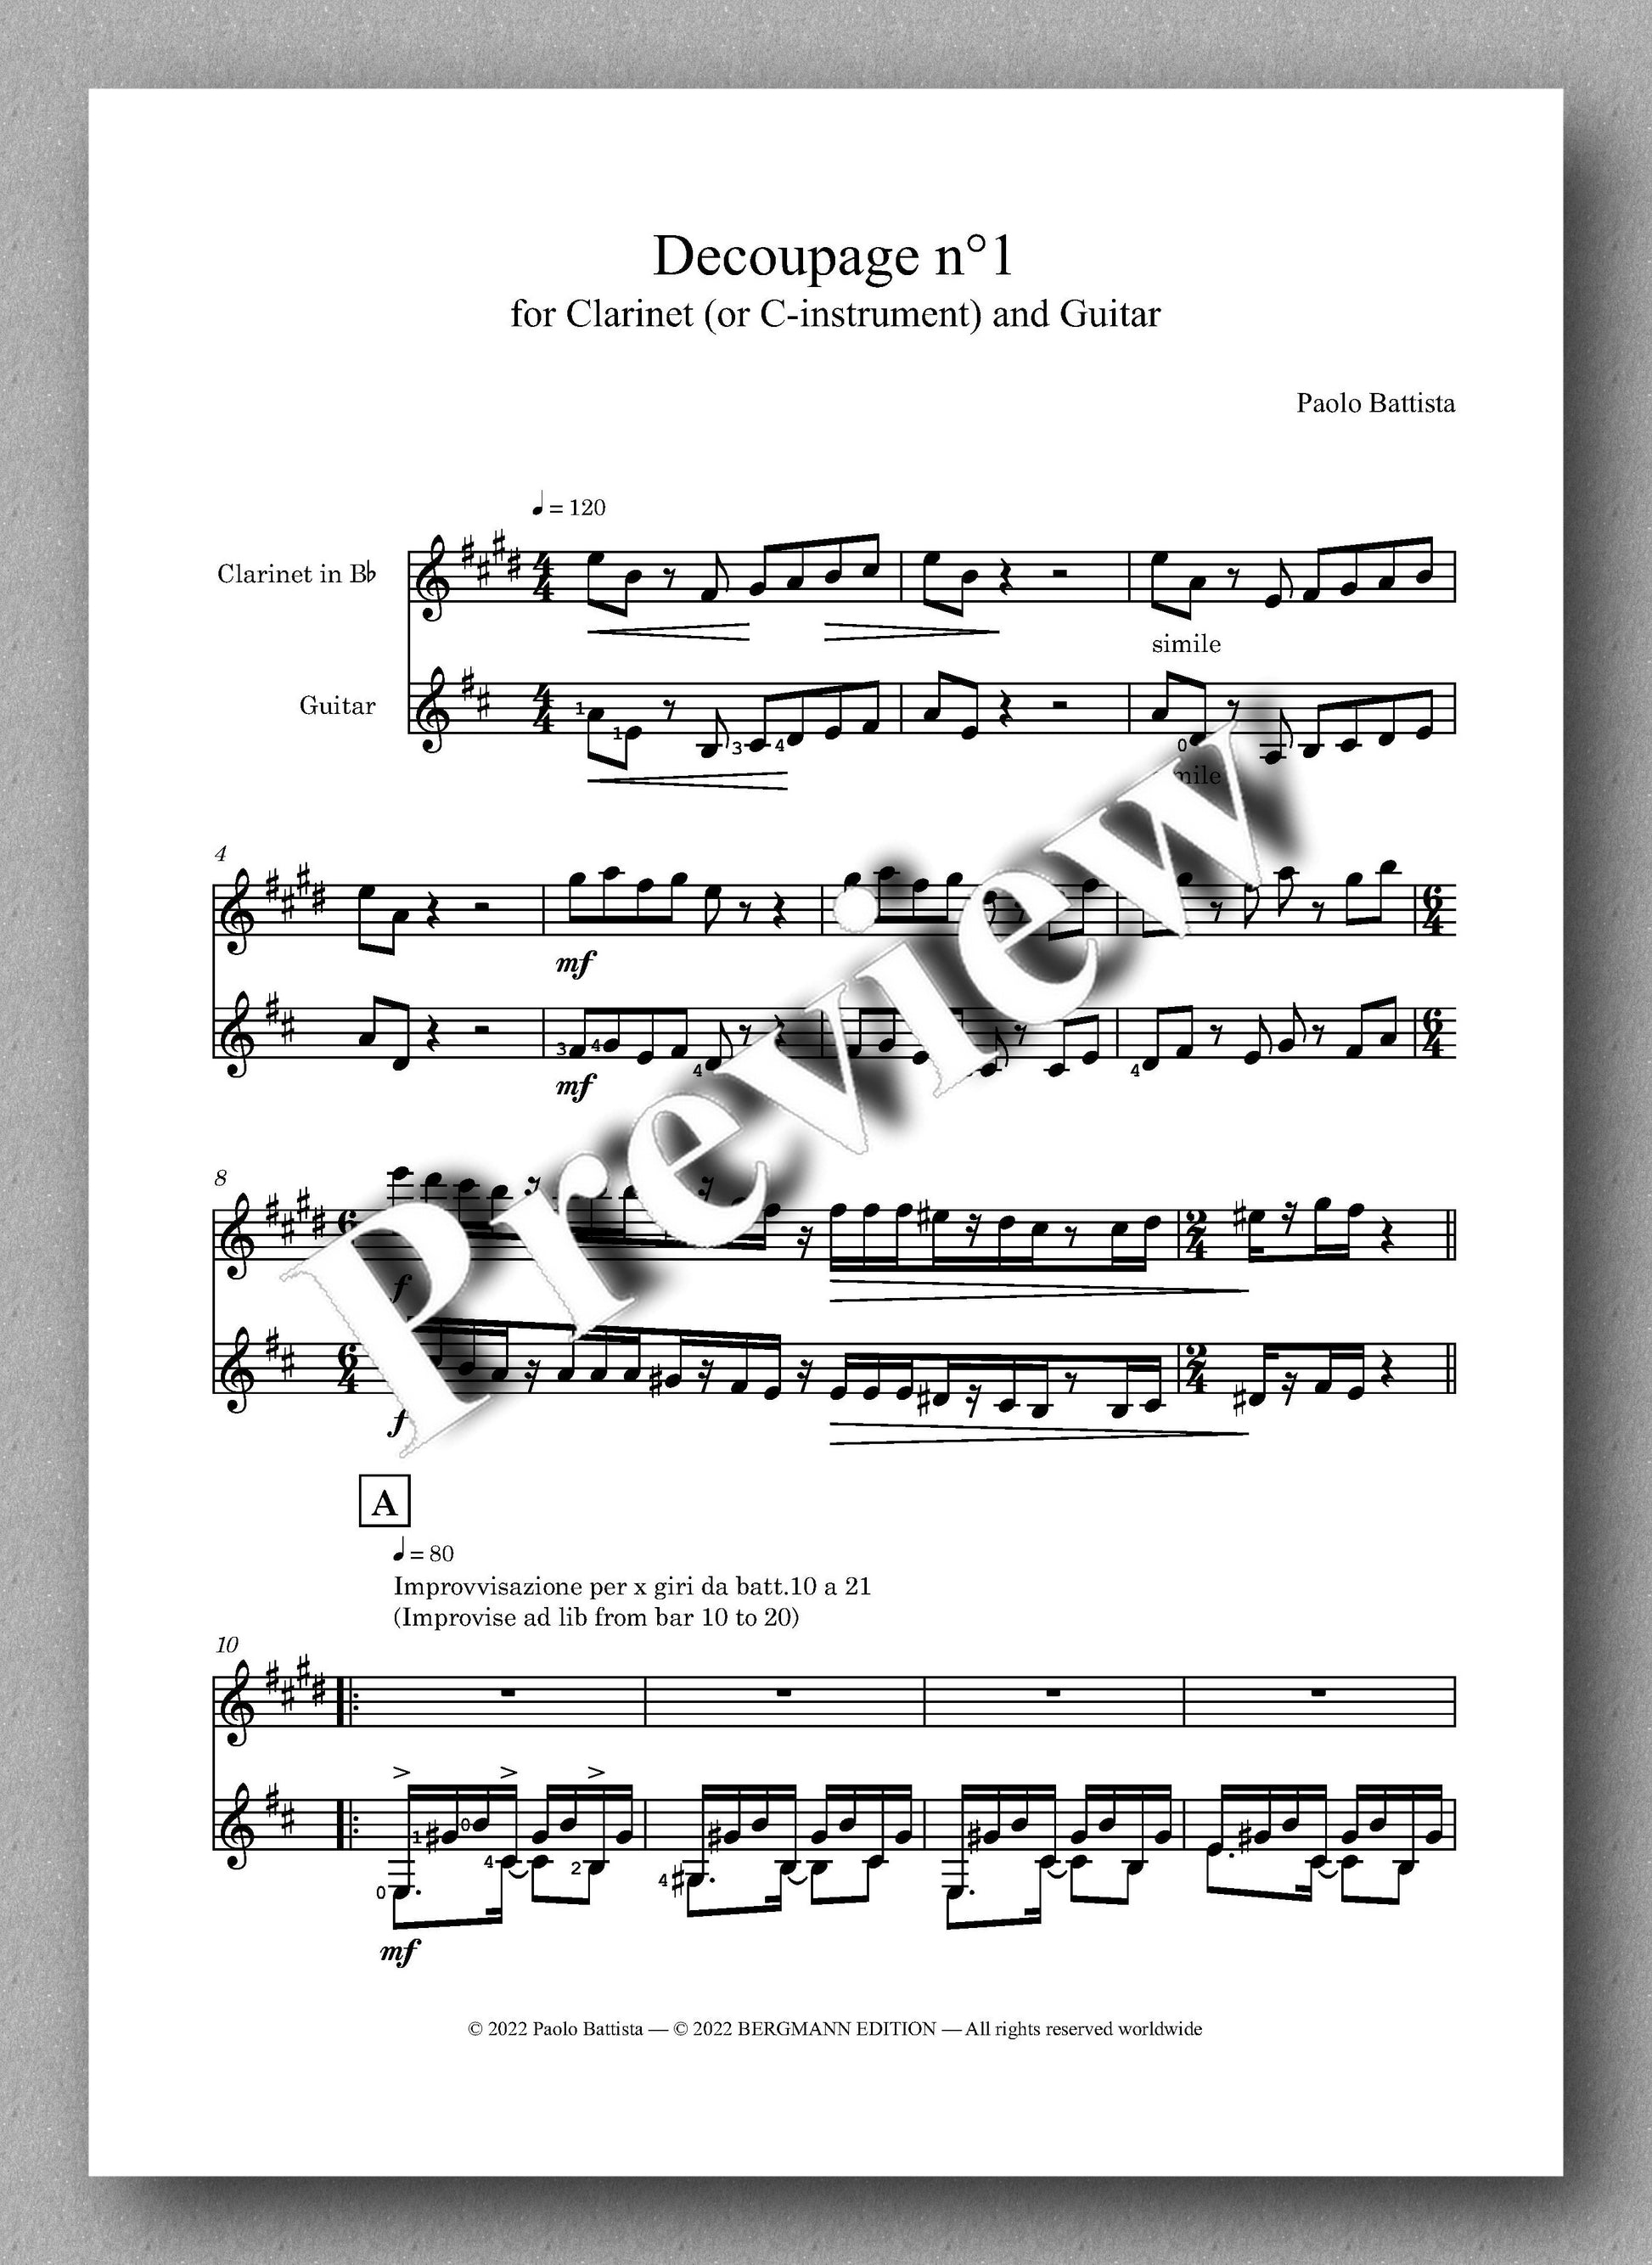 Decoupage n° 1 by Paolo Battista - preview of the music score